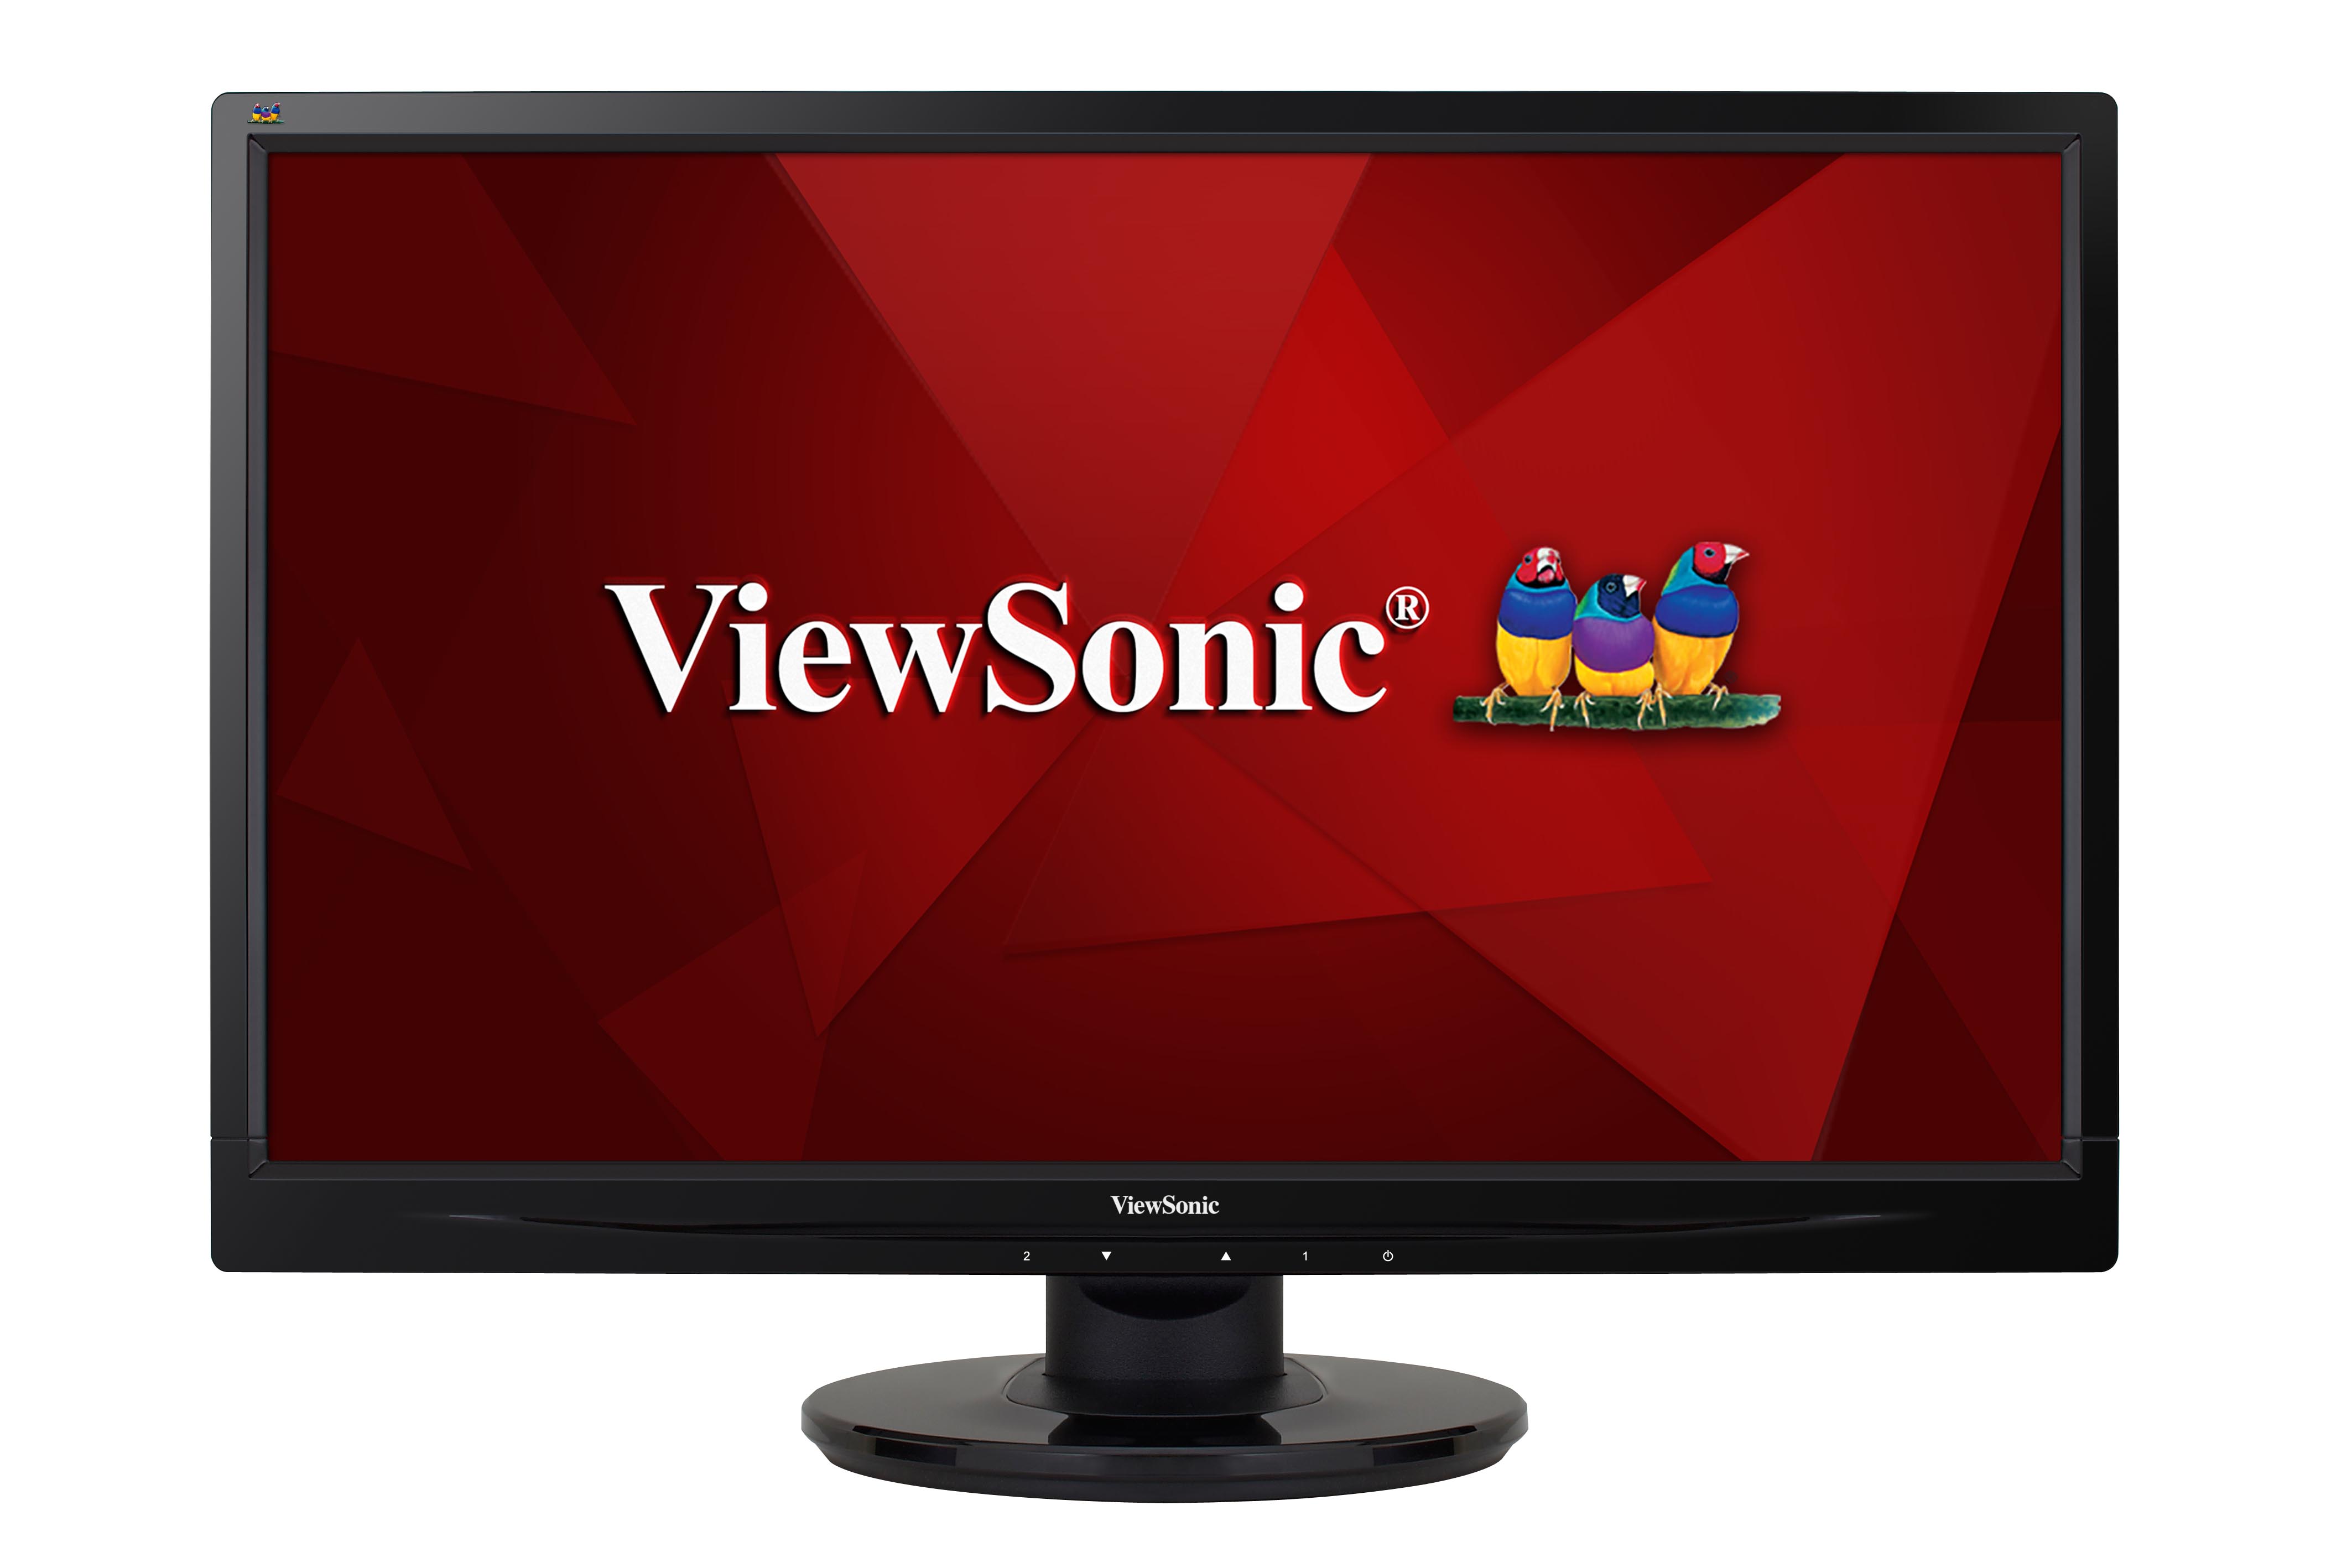 viewsonic drivers for win 10